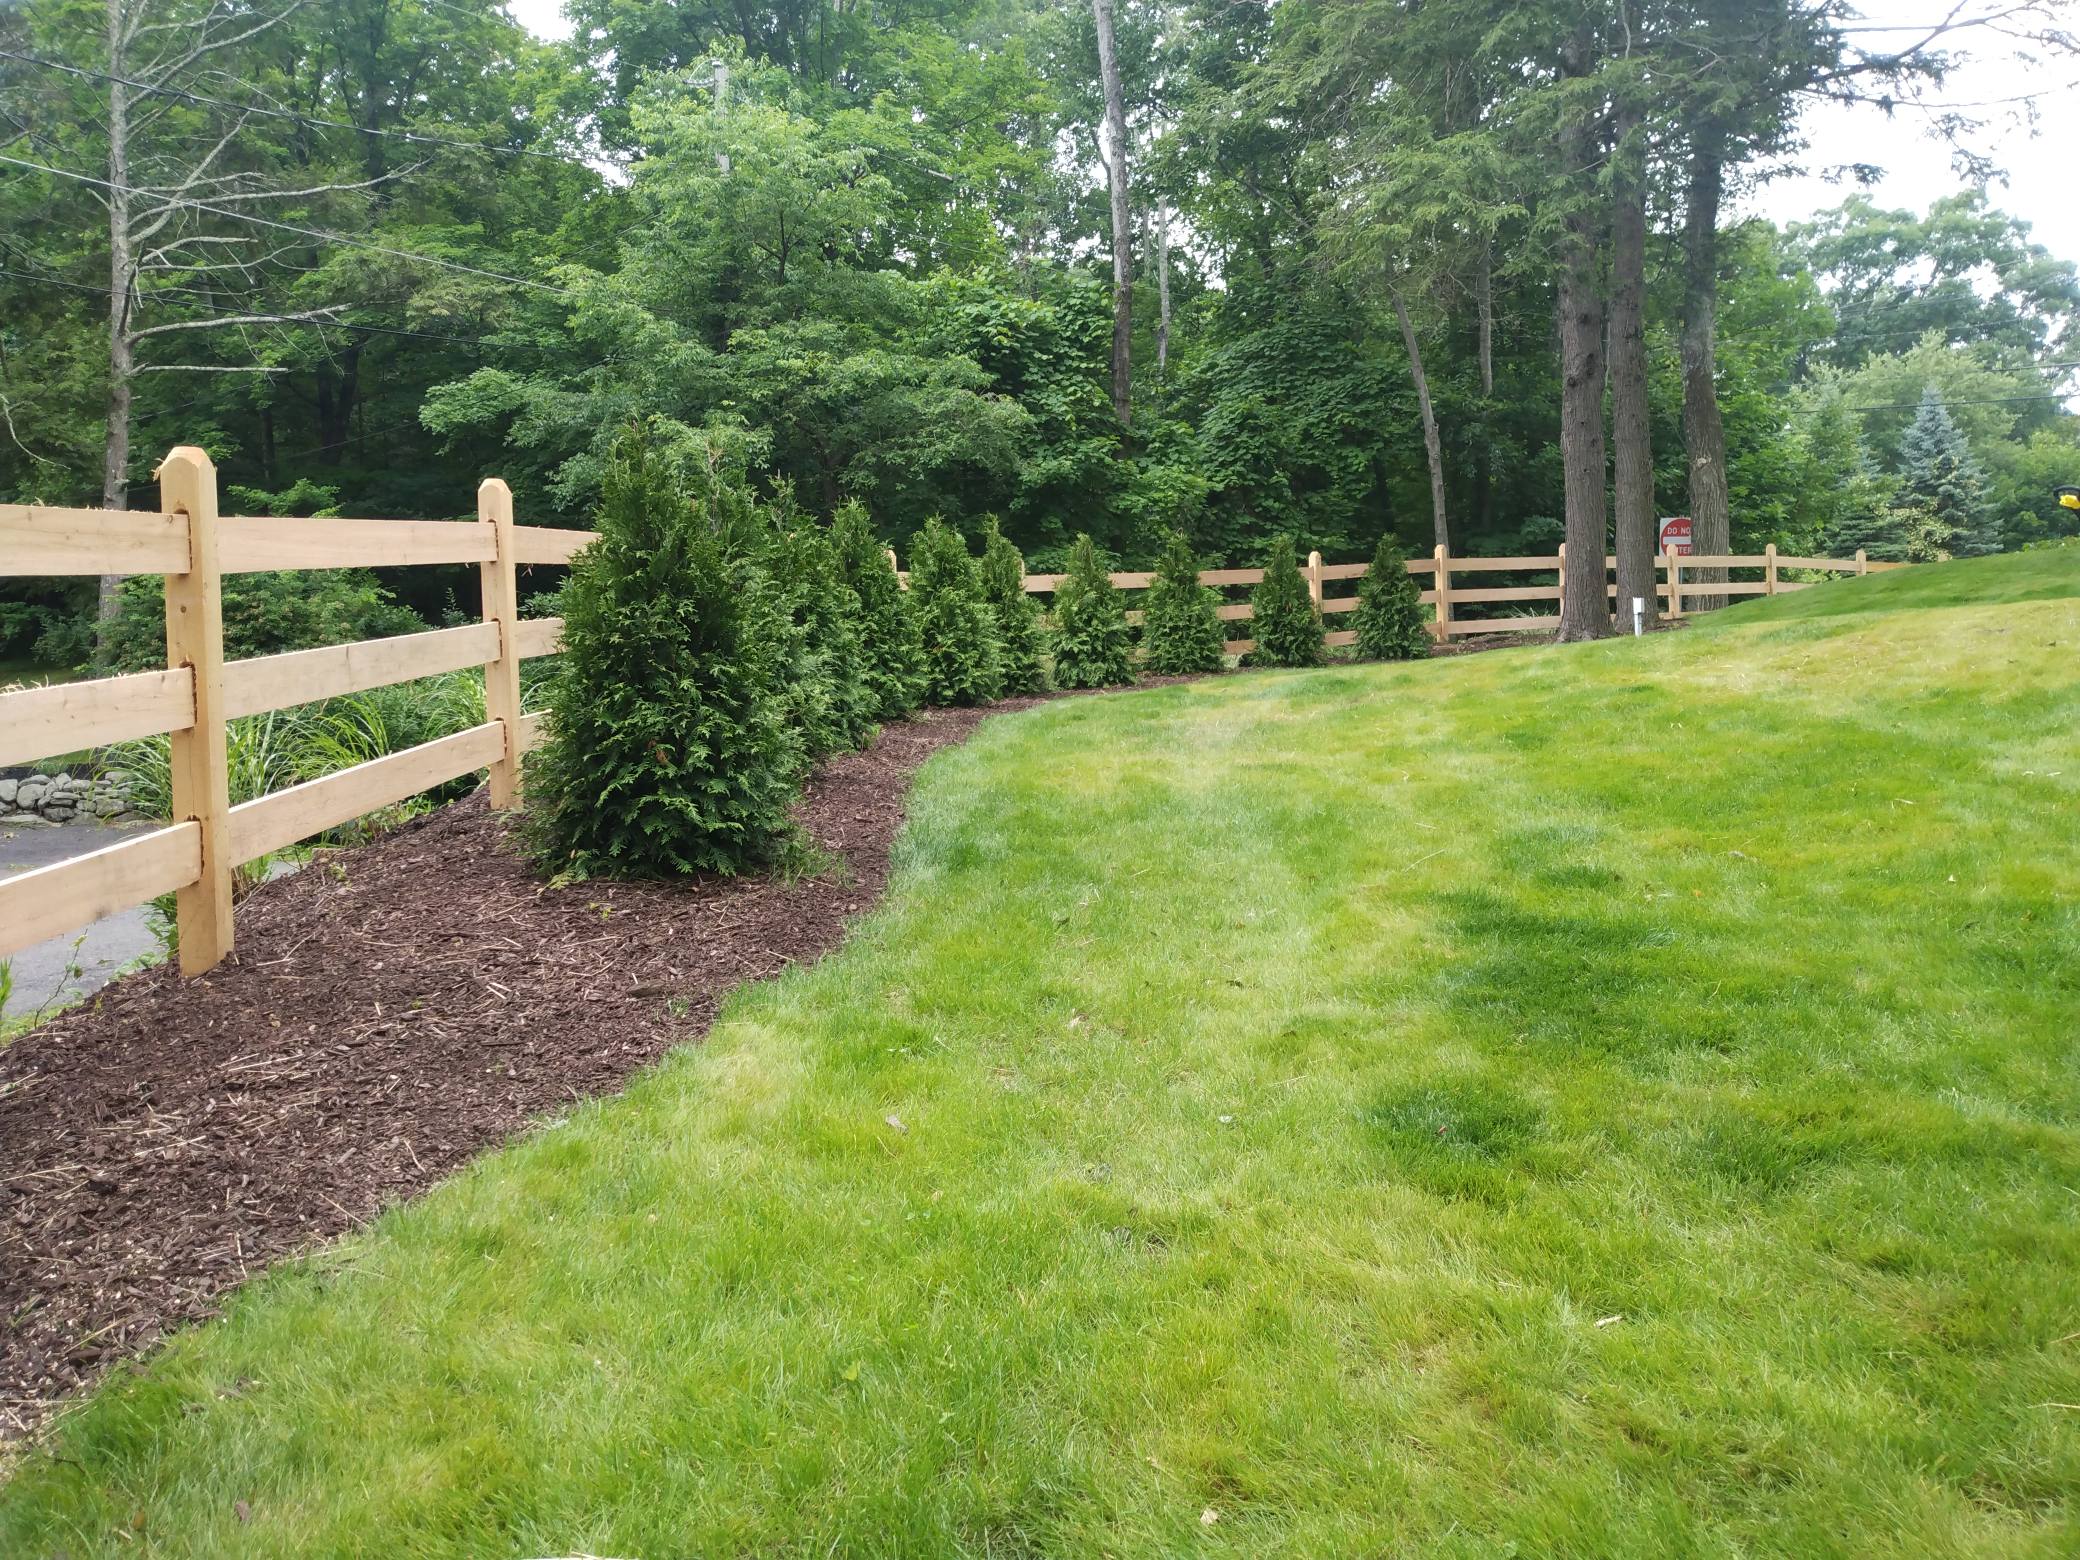 Fence and landscaping